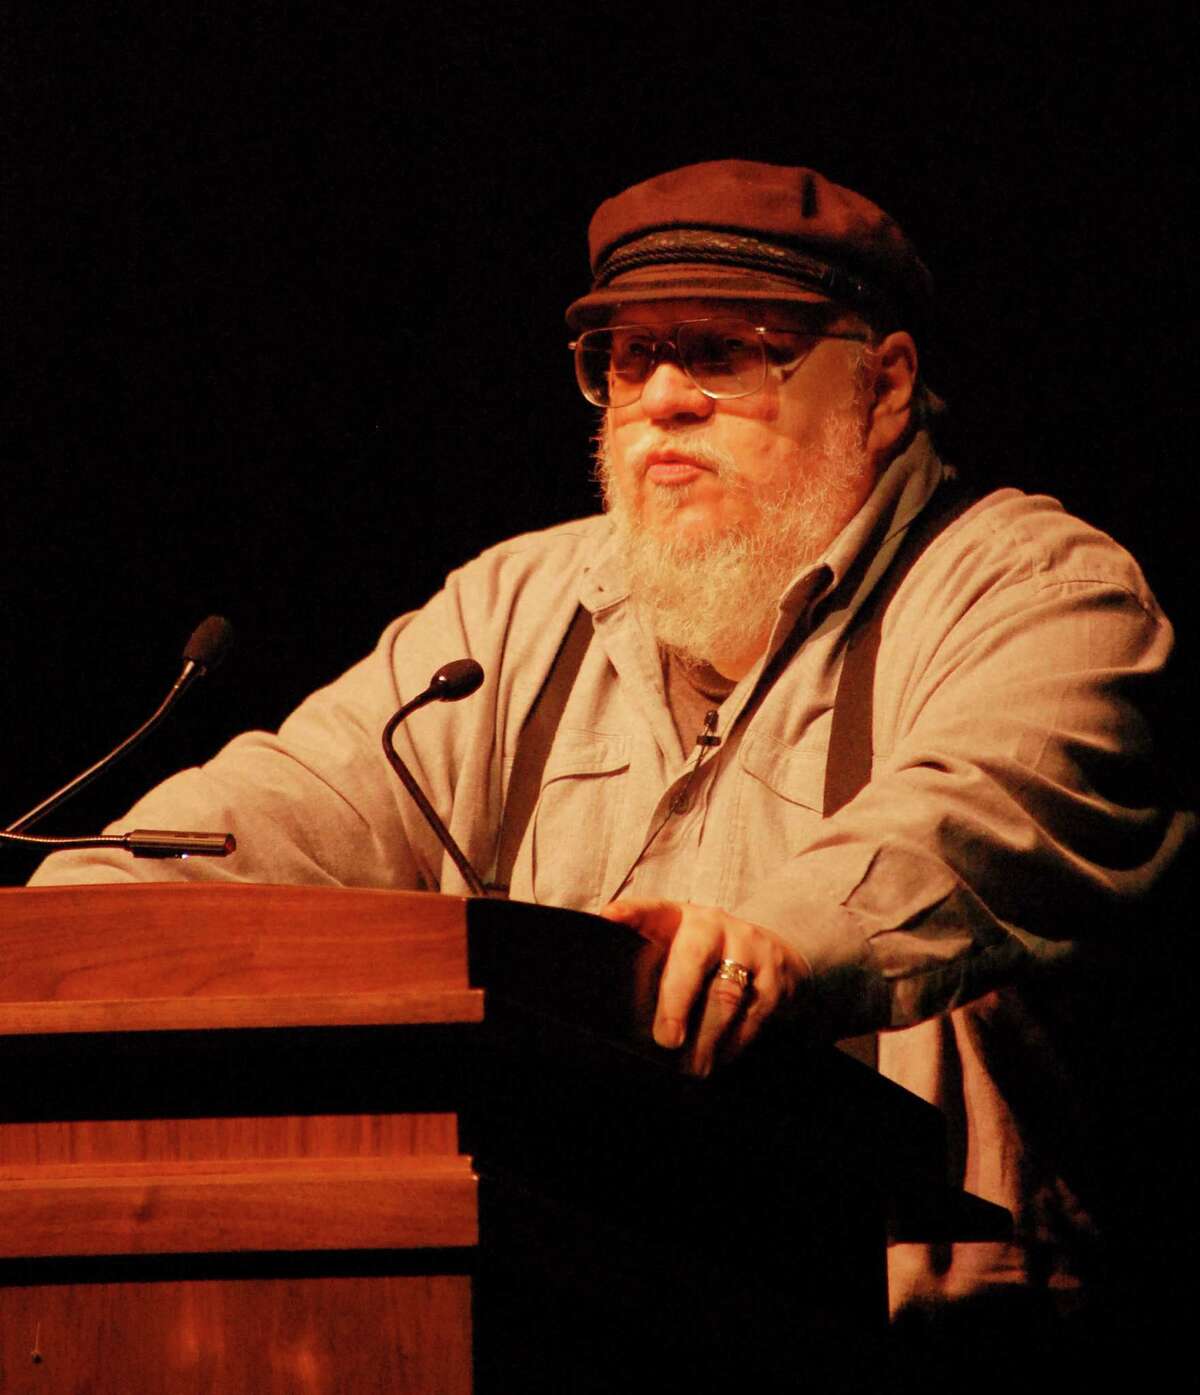 George R.R. Martin, author of the "A Song of Ice and Fire" fantasy series speaks to a packed house at Texas A&M University. The third season of the HBO series "A Game of Thrones," based on Martin's books, premieres tonight